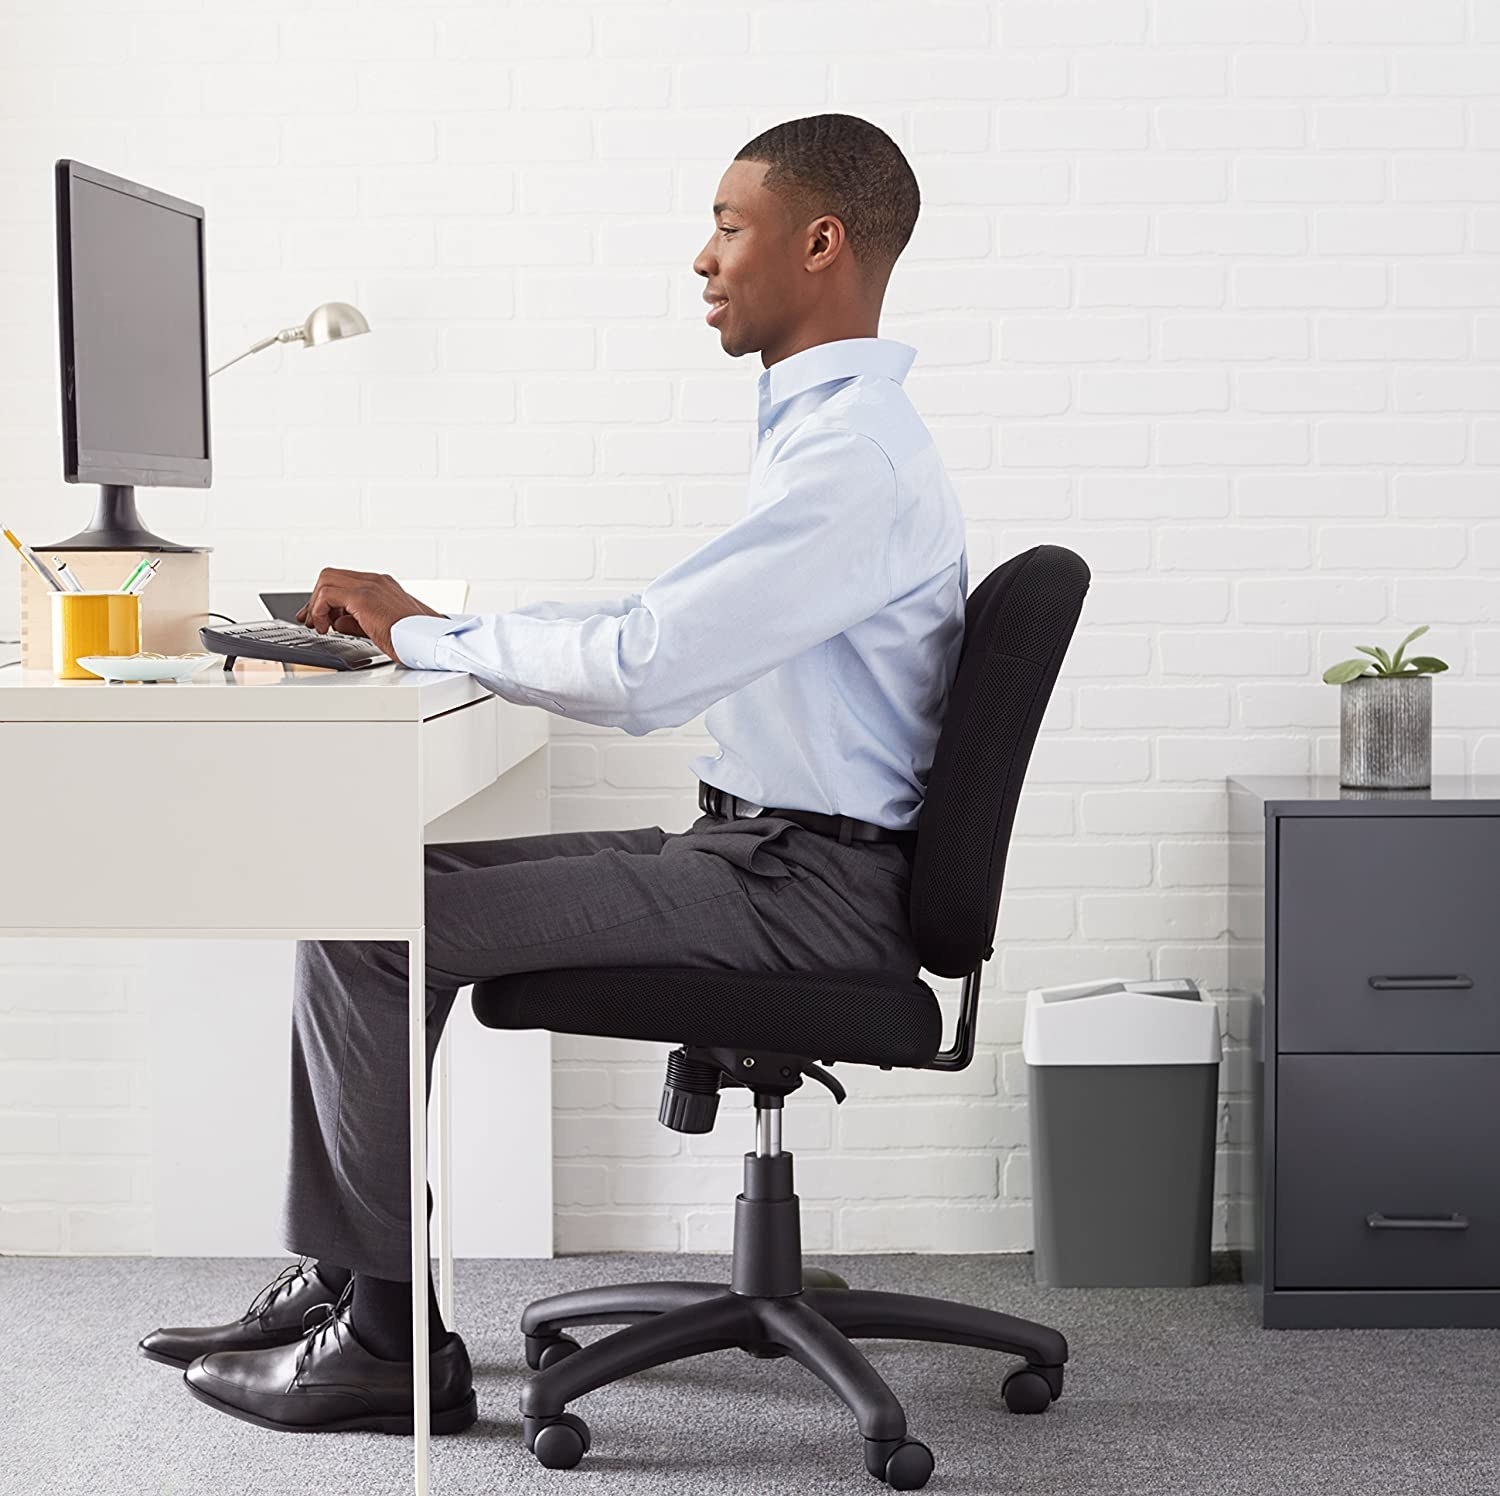 A person sitting at their desk on a chair with wheels